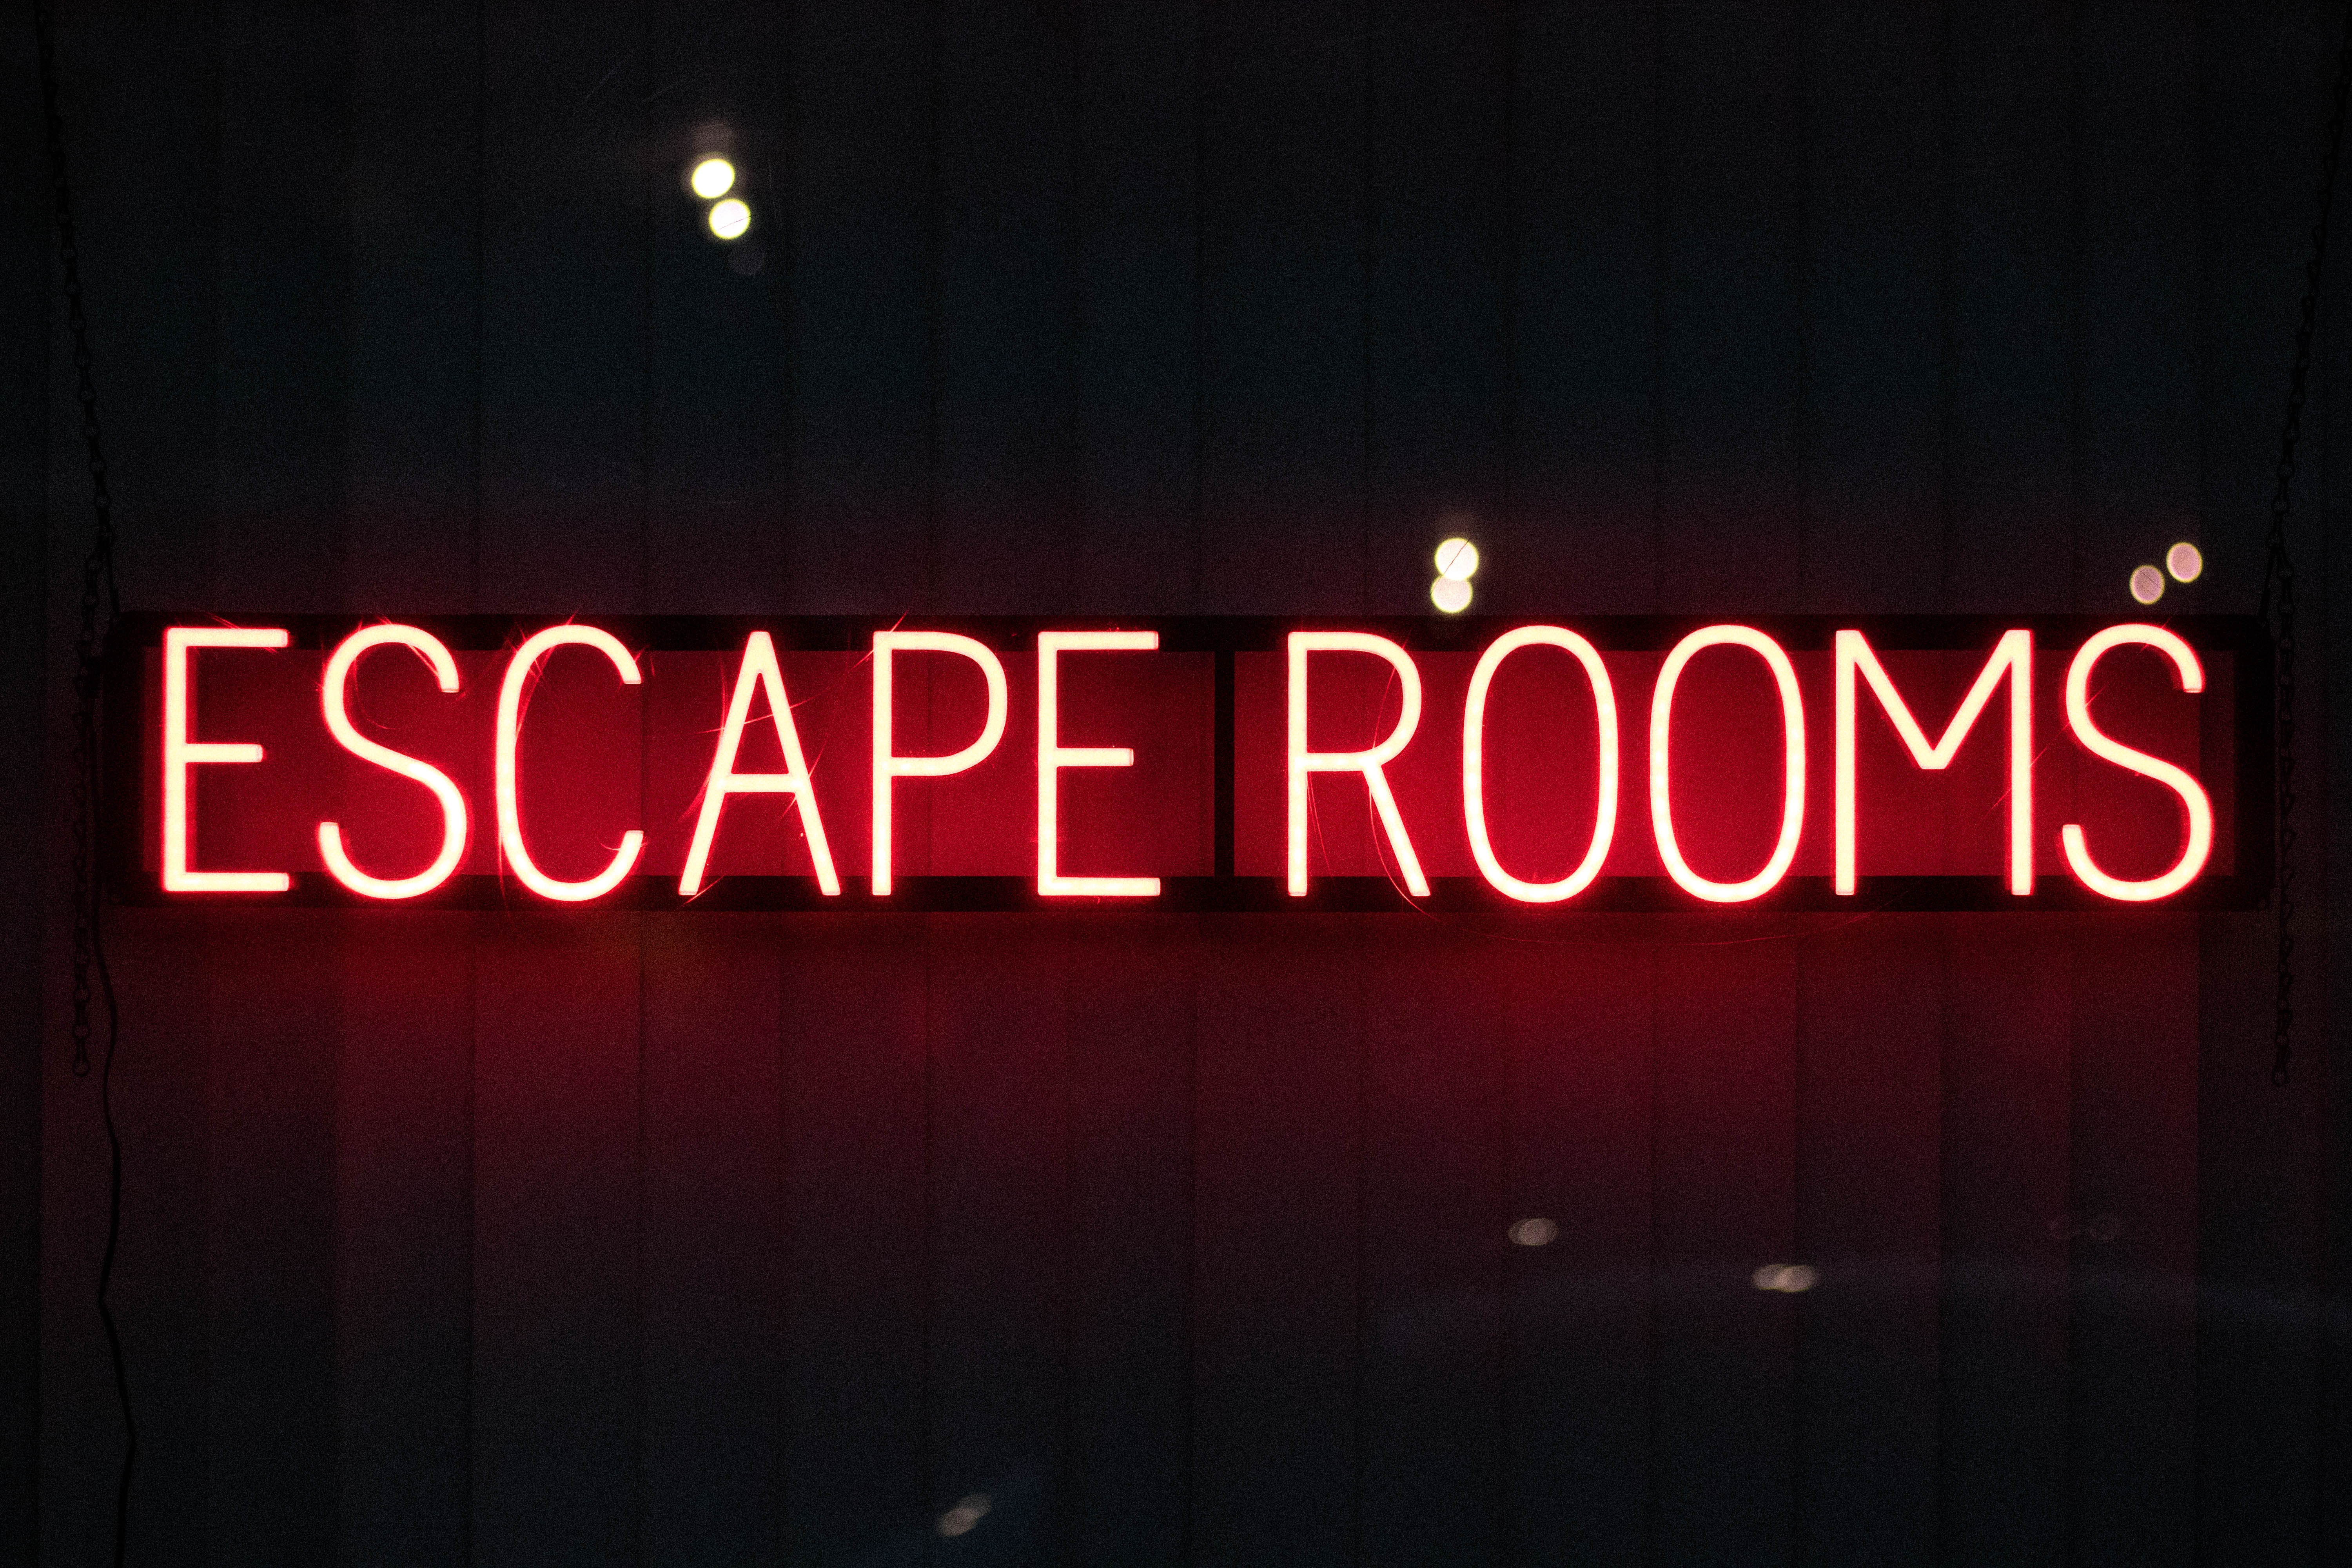 More Facts About Escape Rooms